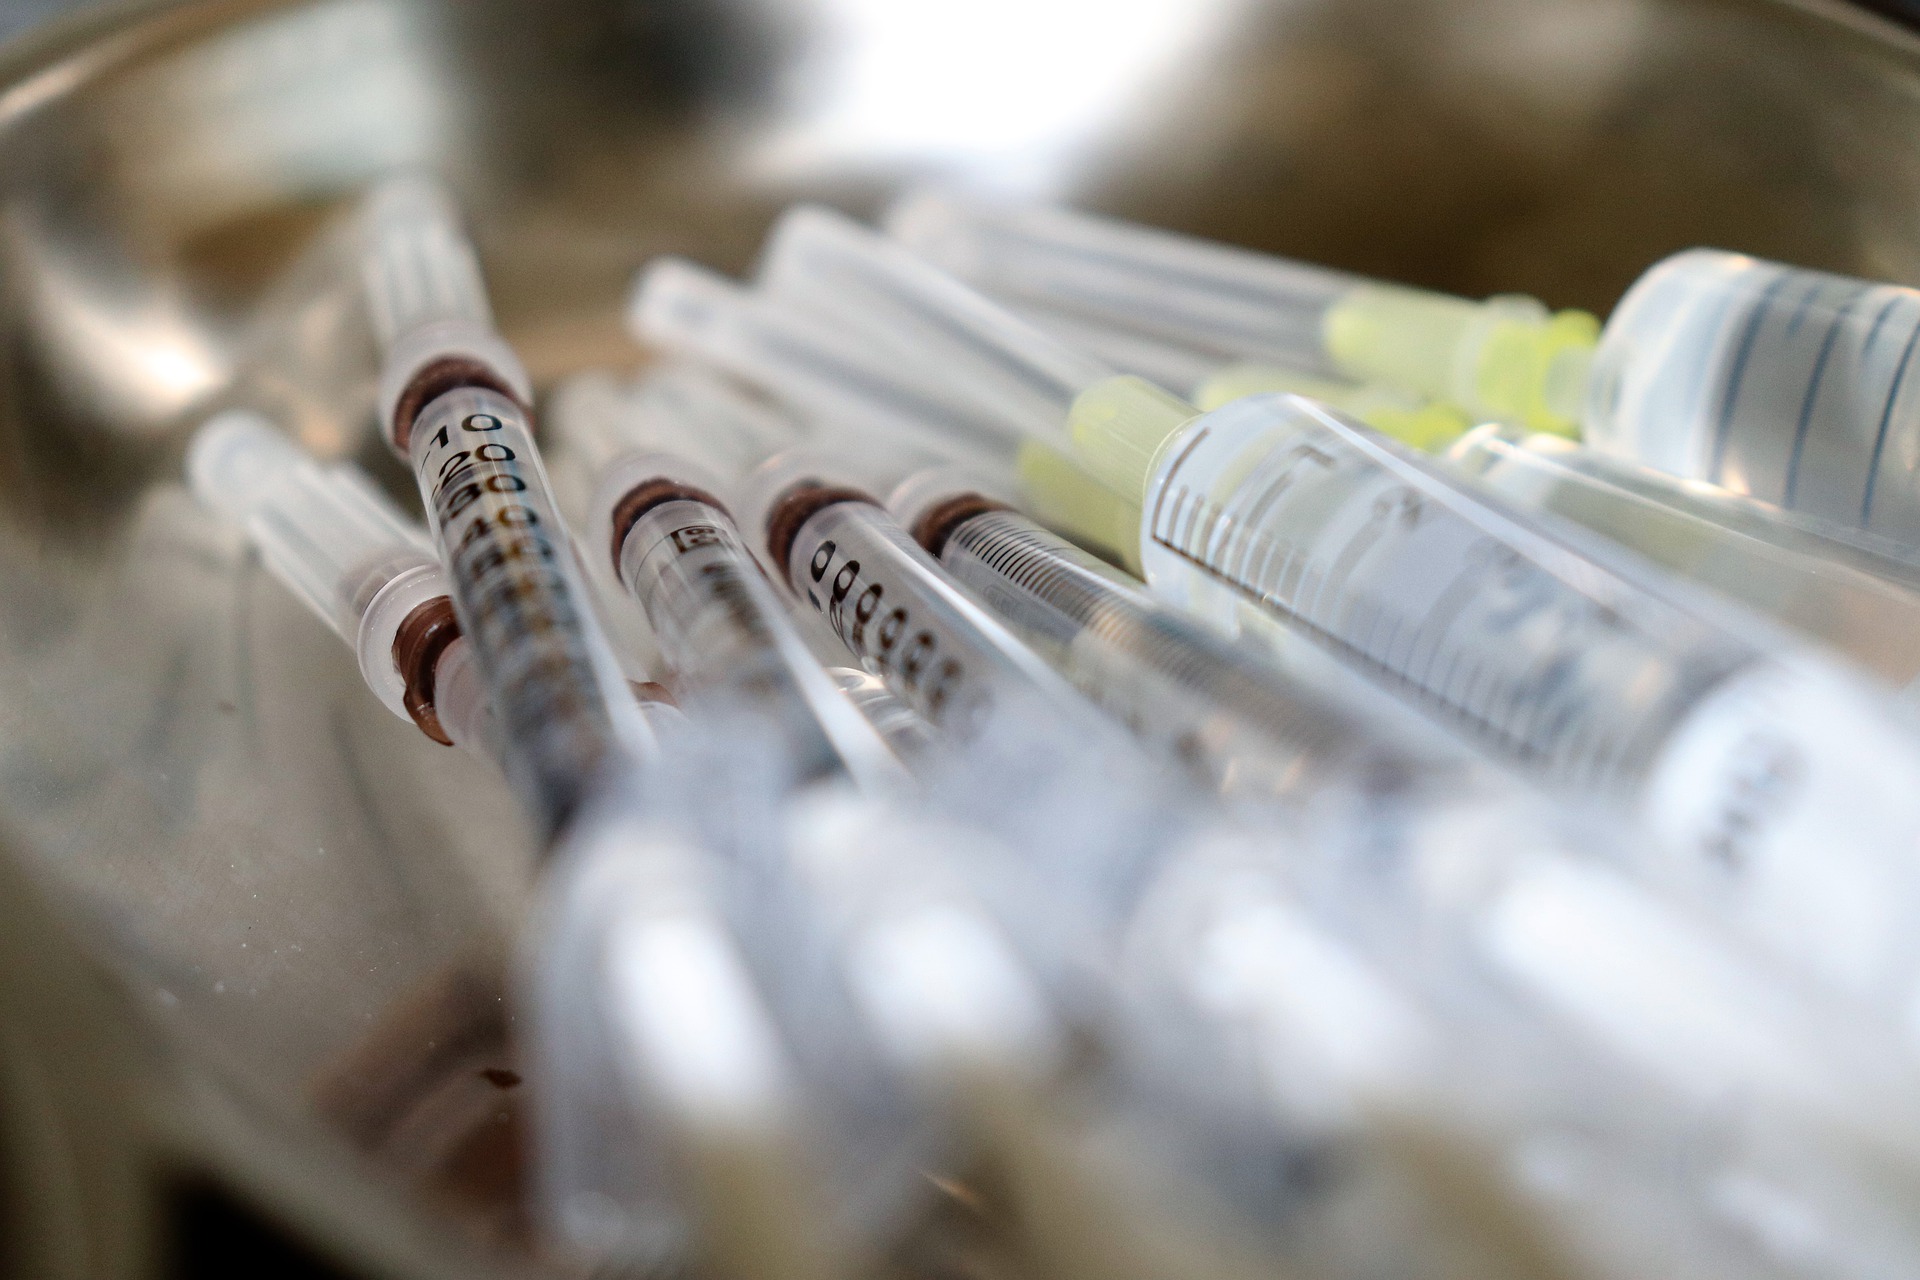 Russian COVID vaccine trials move to final phase in UAE